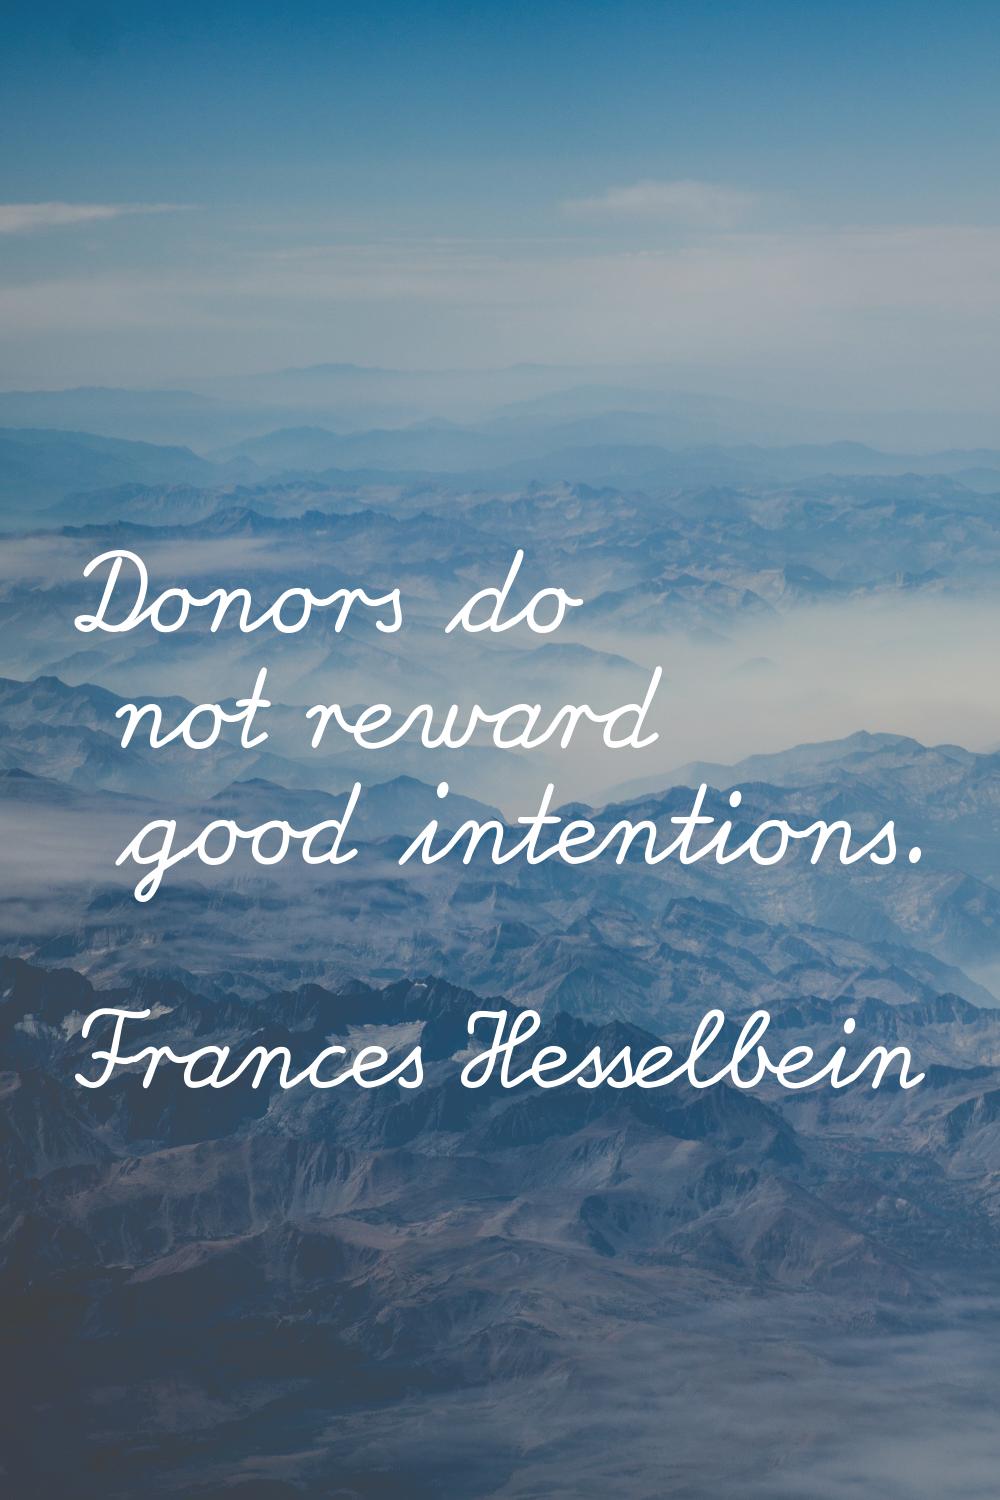 Donors do not reward good intentions.